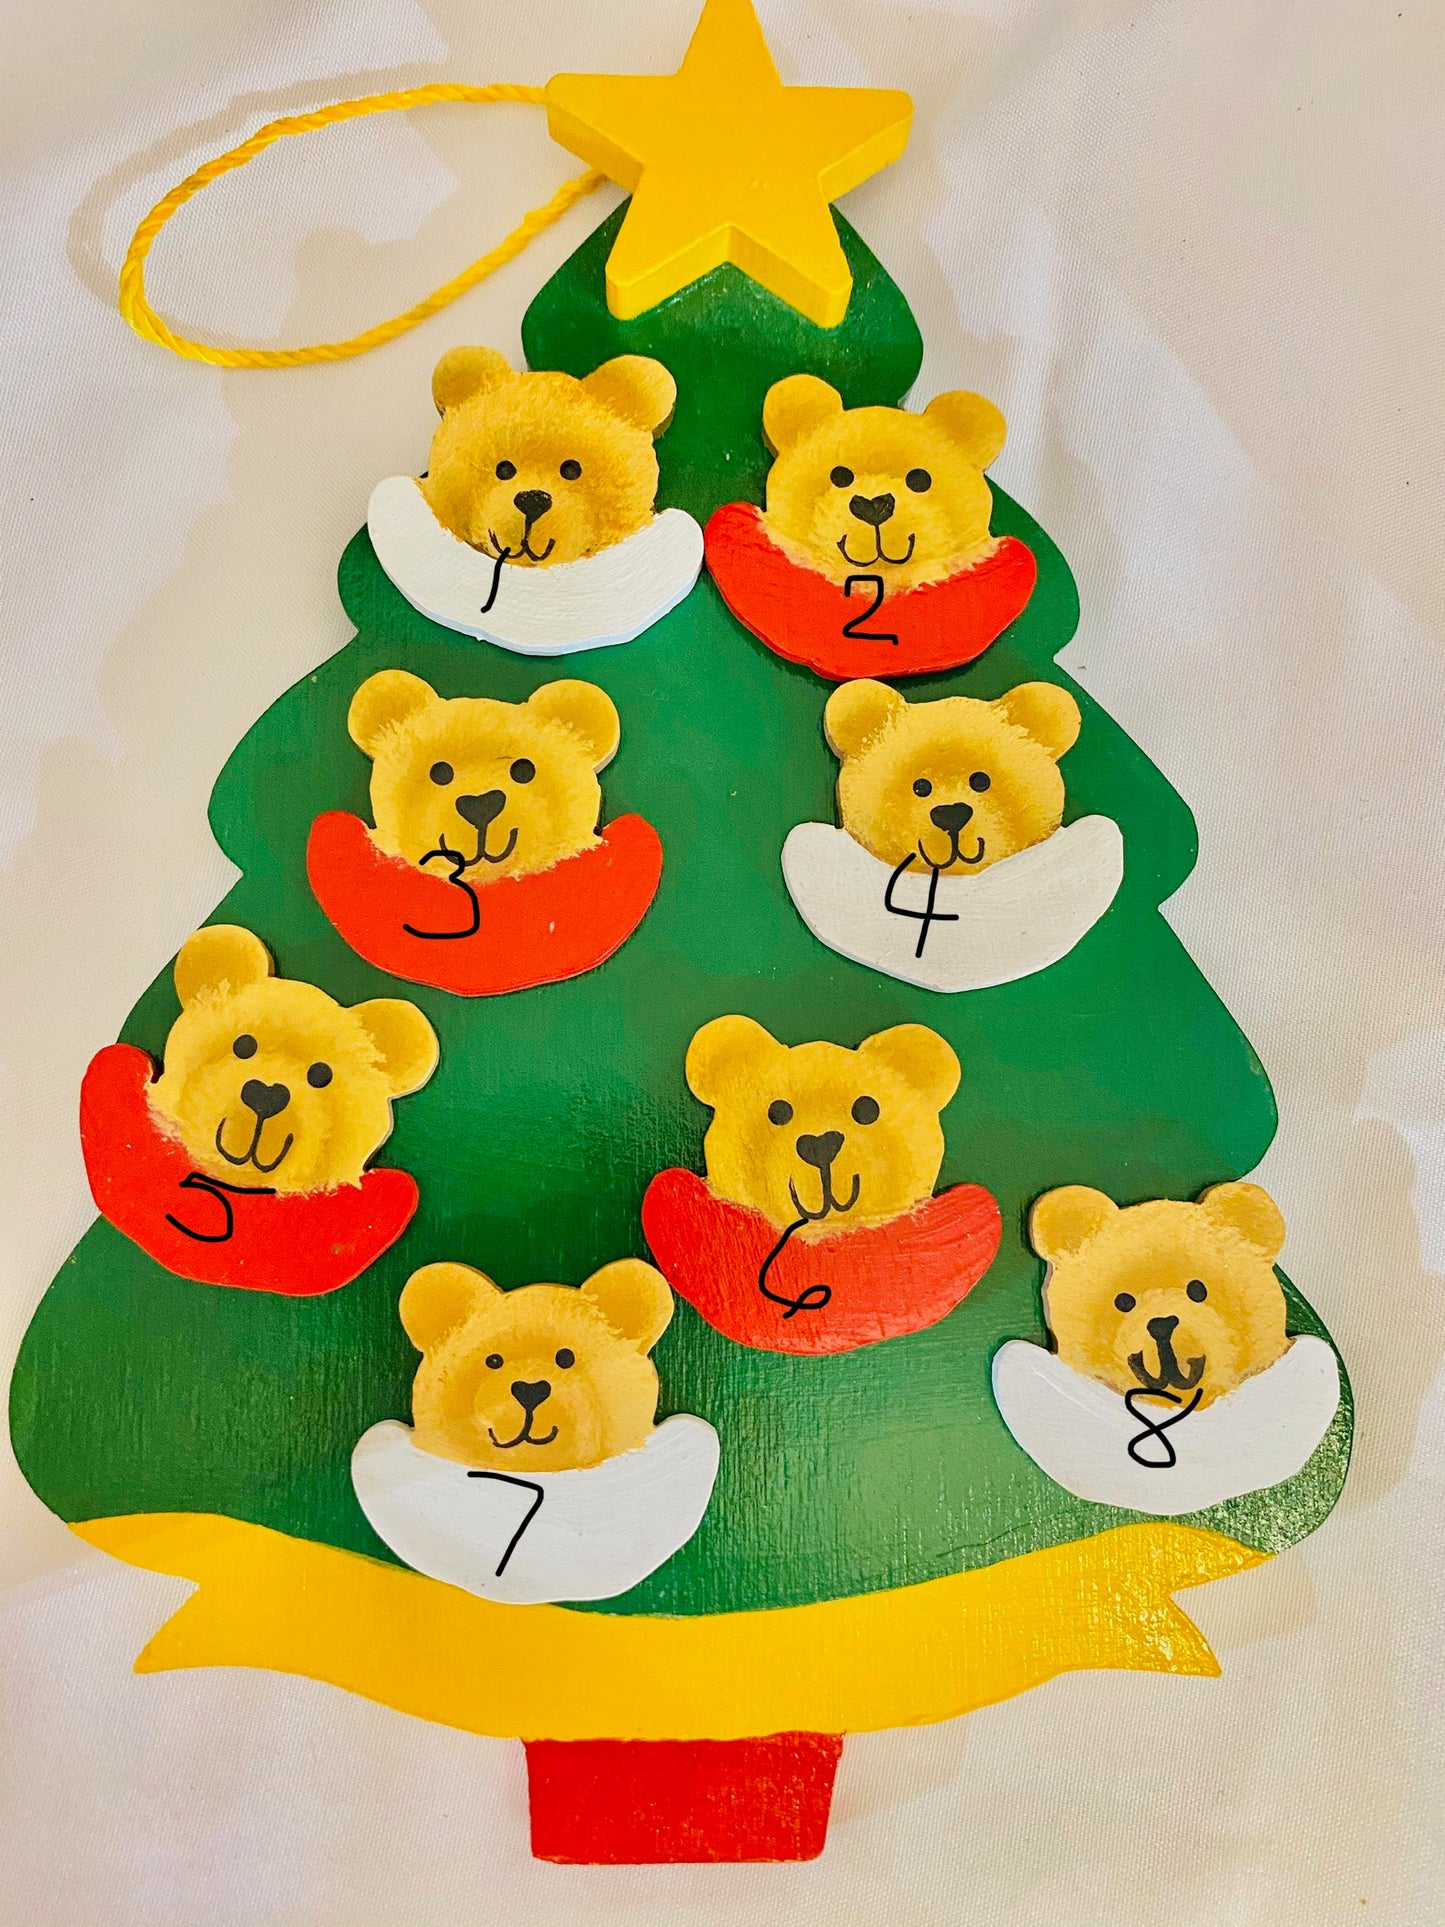 Personalized Ornament  8 Bear Faces on a Christmas Tree 7.5"  x 6"